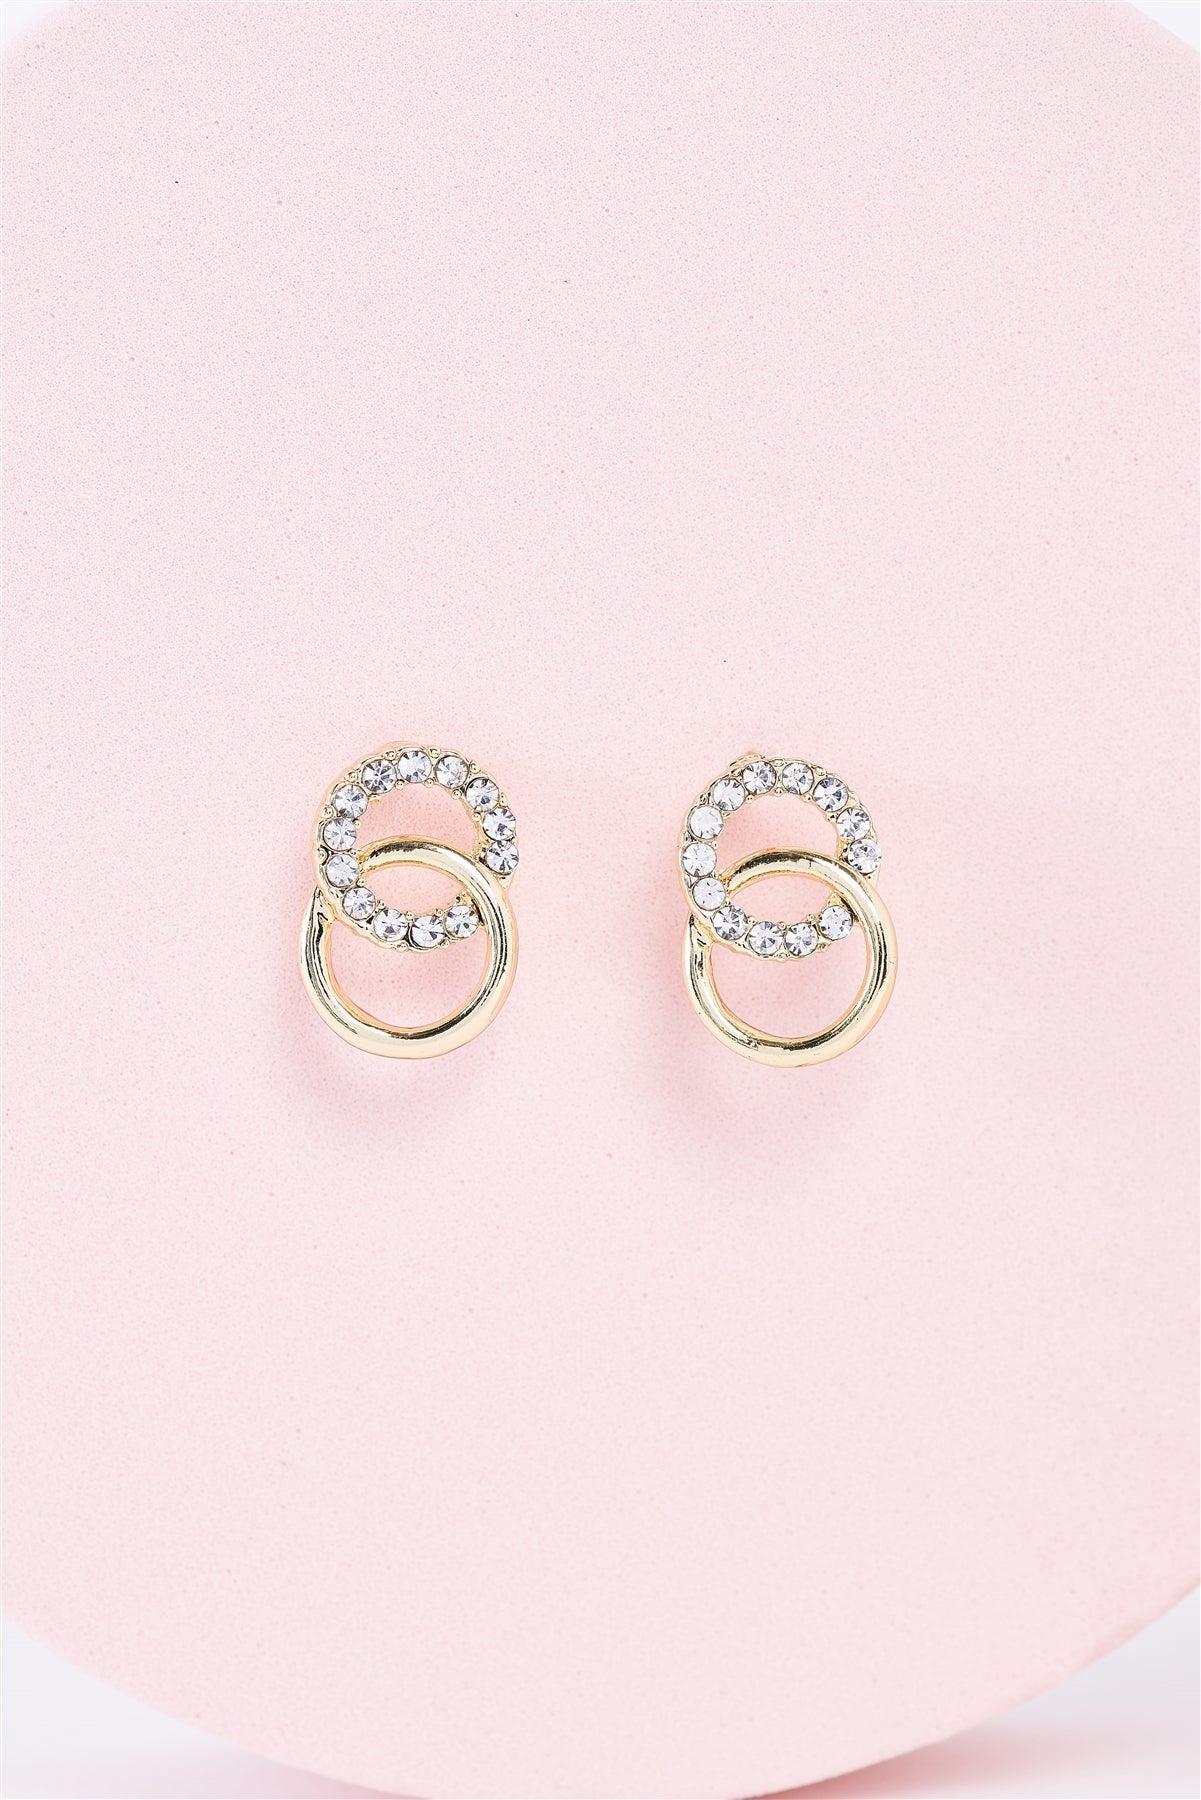 Gold Small Linked Hoops Faux Diamonds Incrusted Stud Earrings /3 Pairs